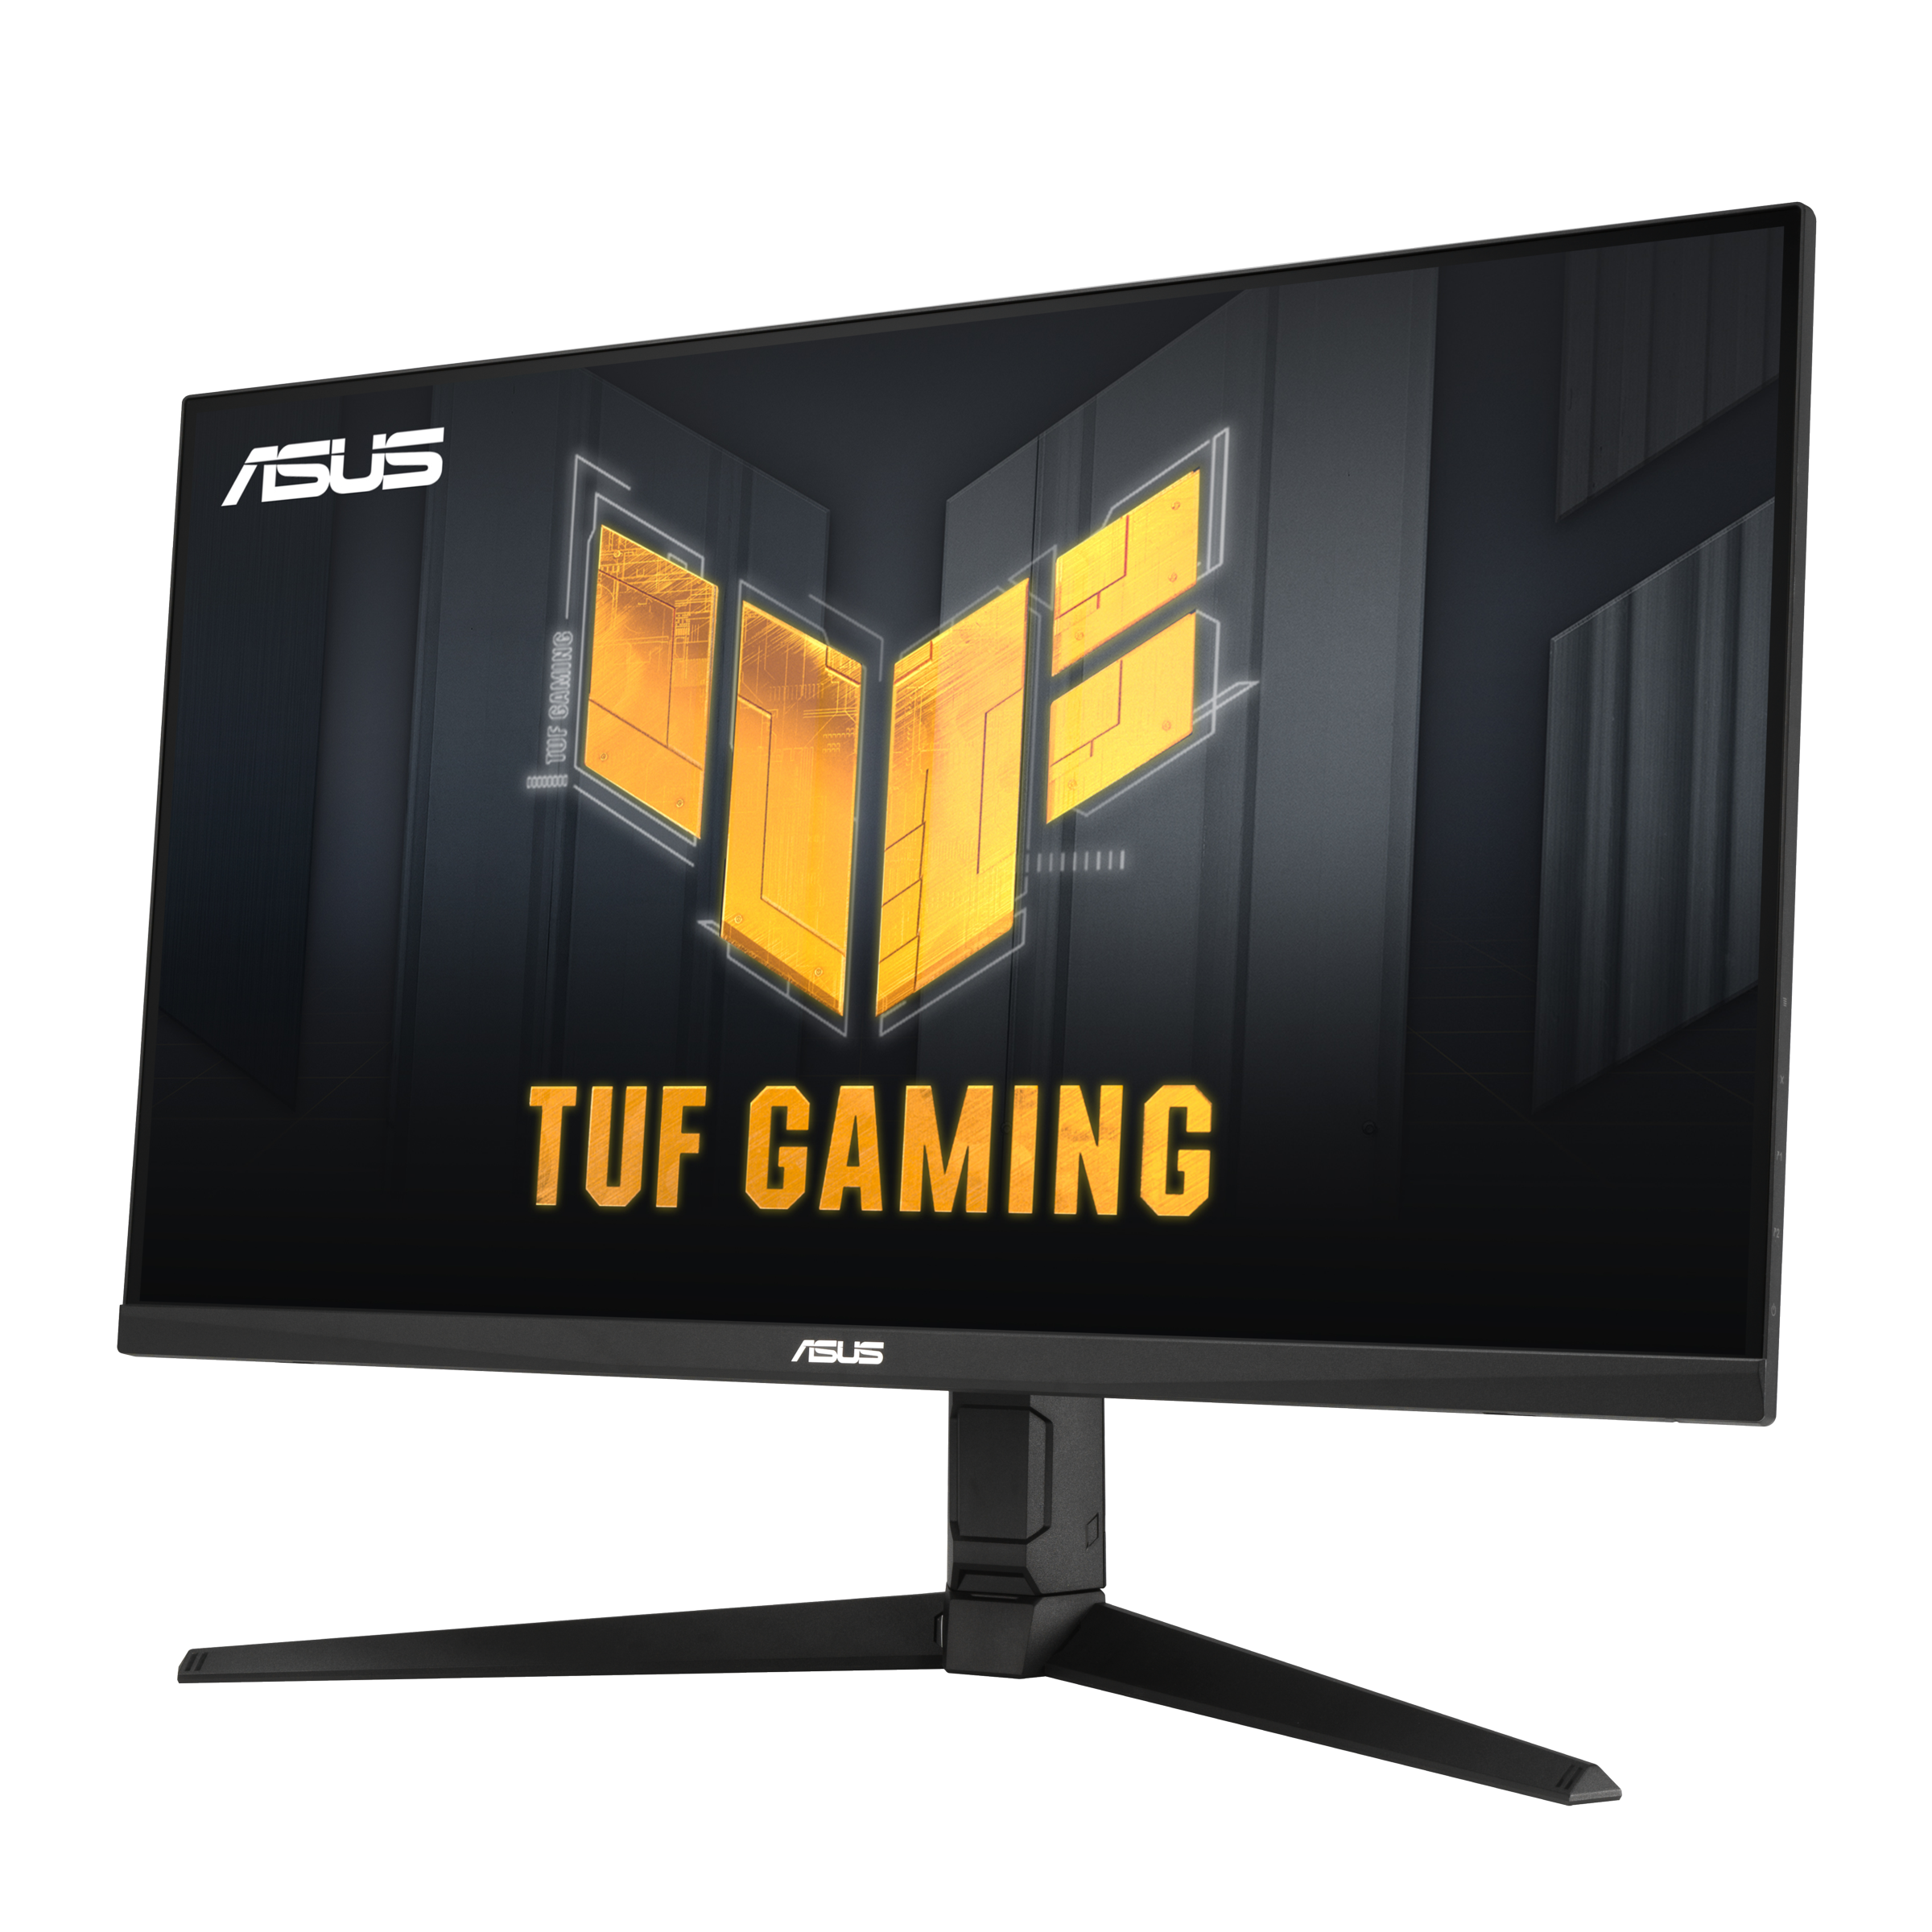 Media asset in full size related to 3dfxzone.it news item entitled as follows: ASUS introduce il monitor TUF Gaming VG32AQL1A con pannello IPS QHD da 1ms | Image Name: news32277_ASUS-TUF-Gaming-VG32AQL1A_2.png